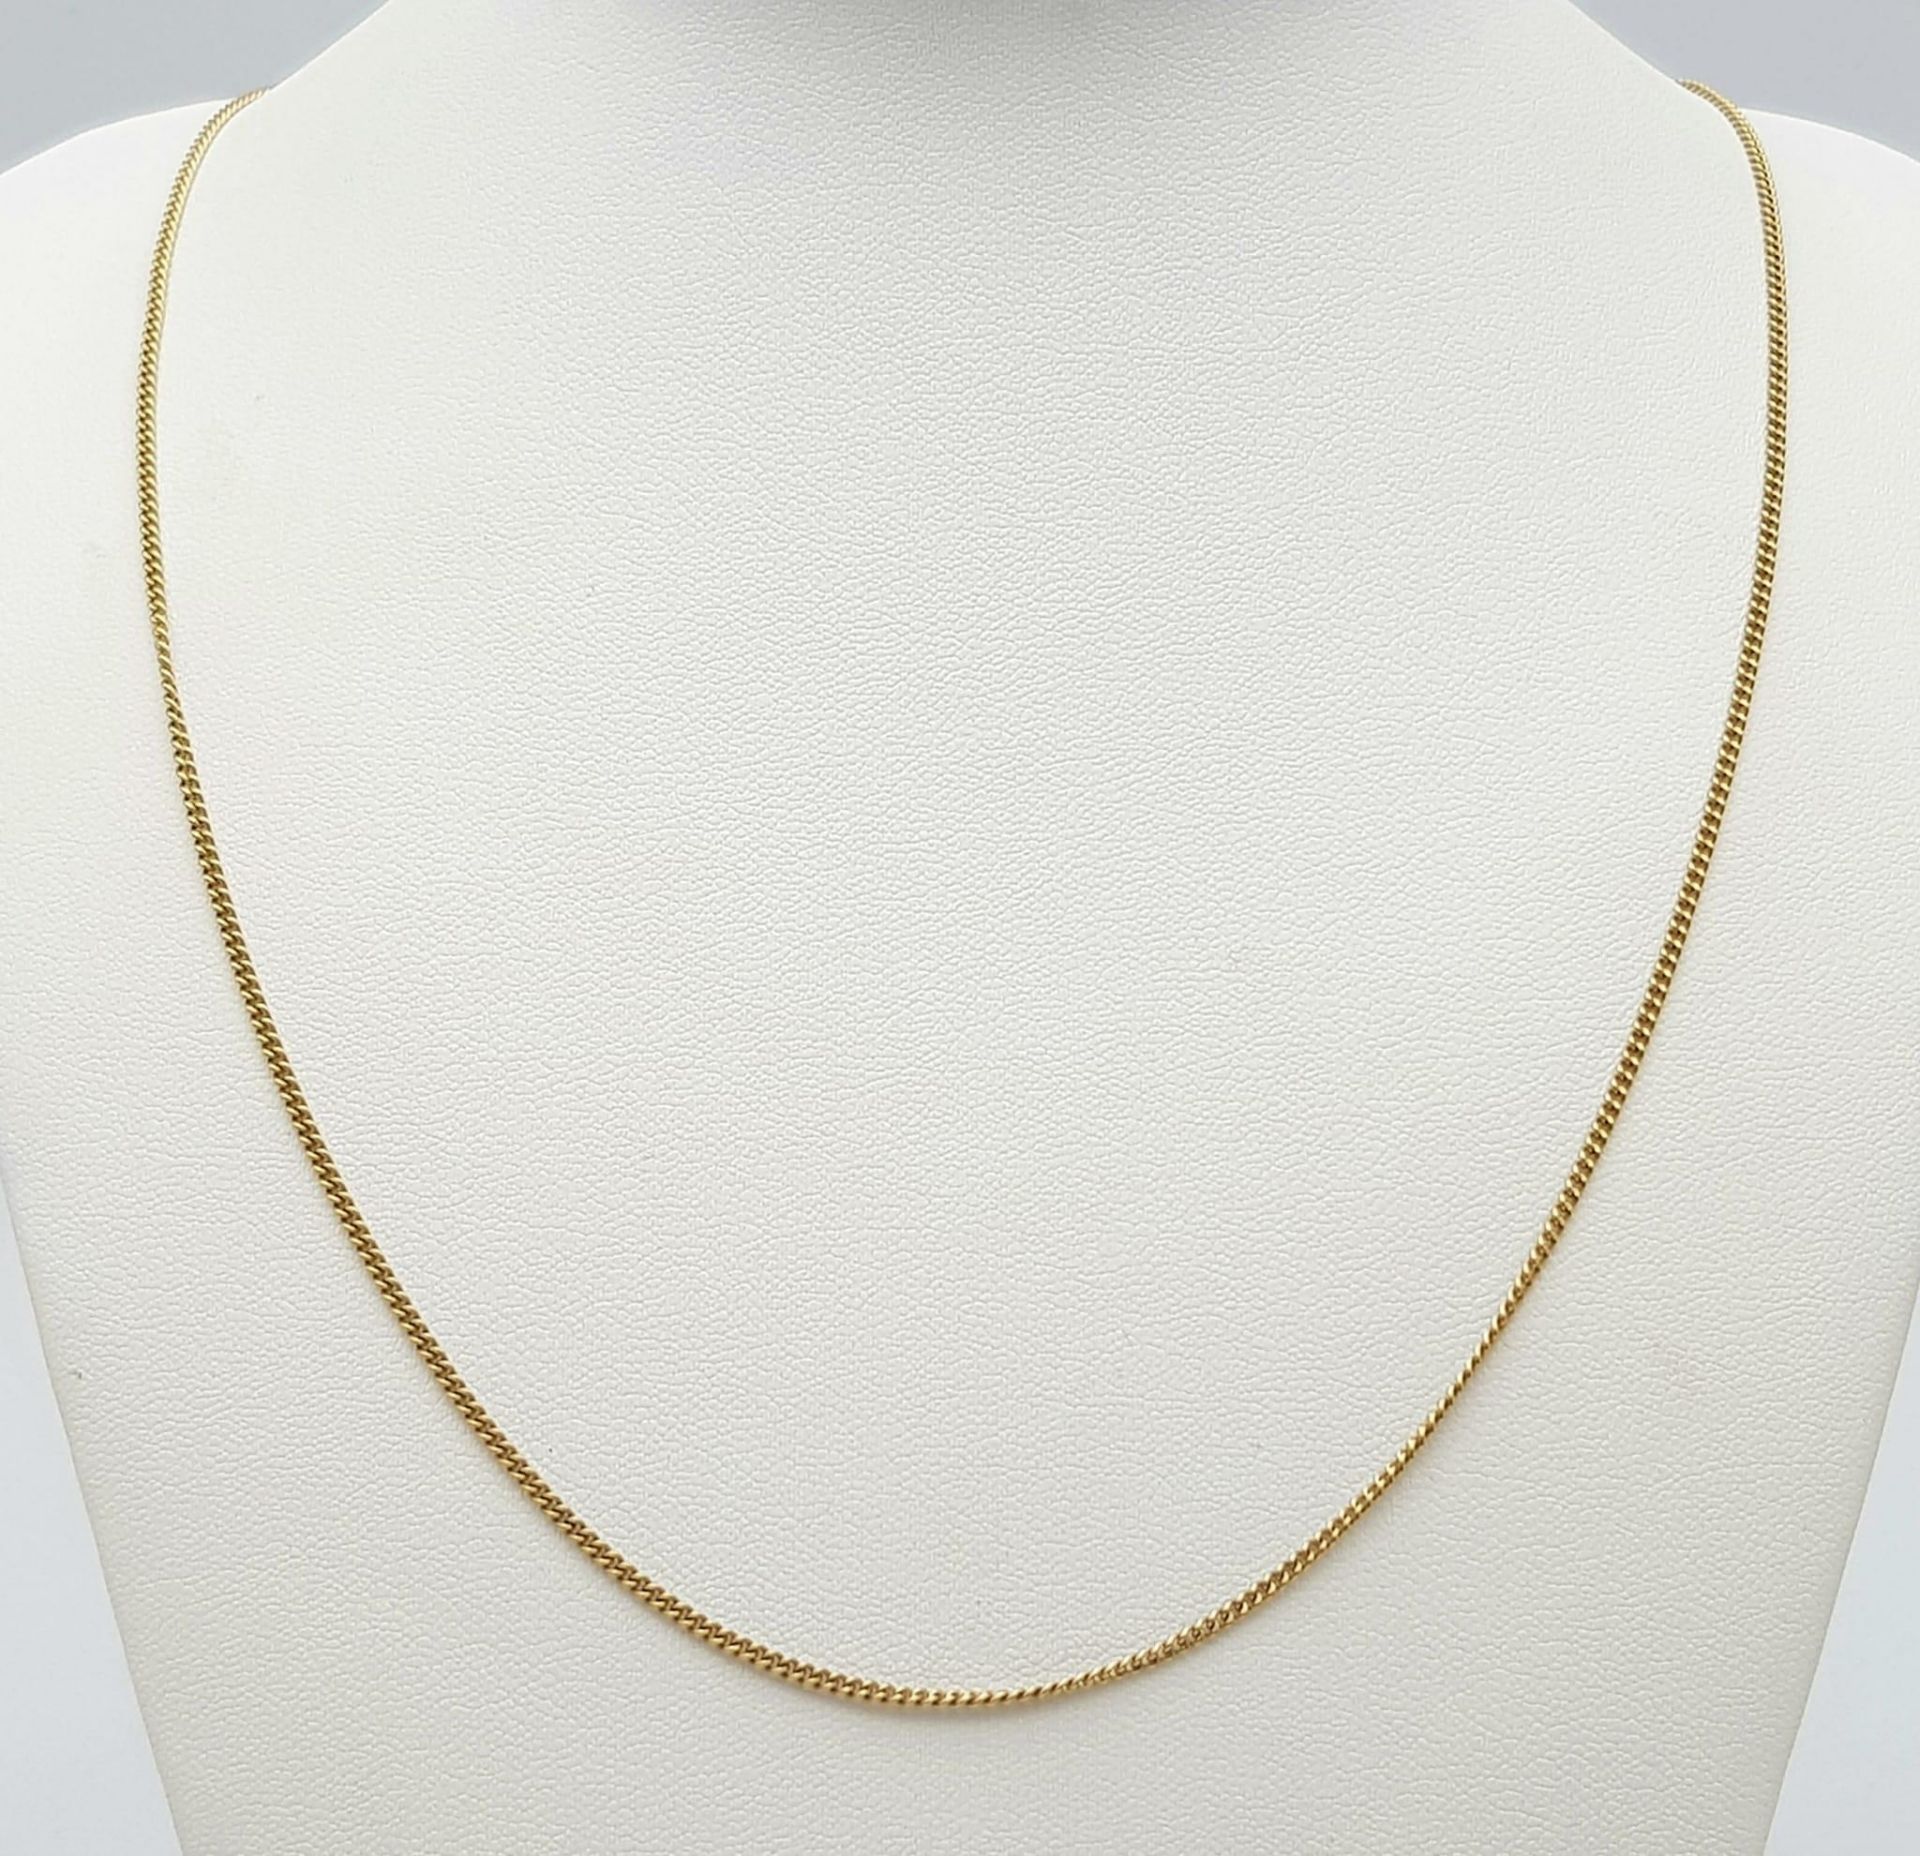 A 9K Yellow Gold Small Curb Link Necklace. 50cm length. 3.66g weight. - Image 3 of 4